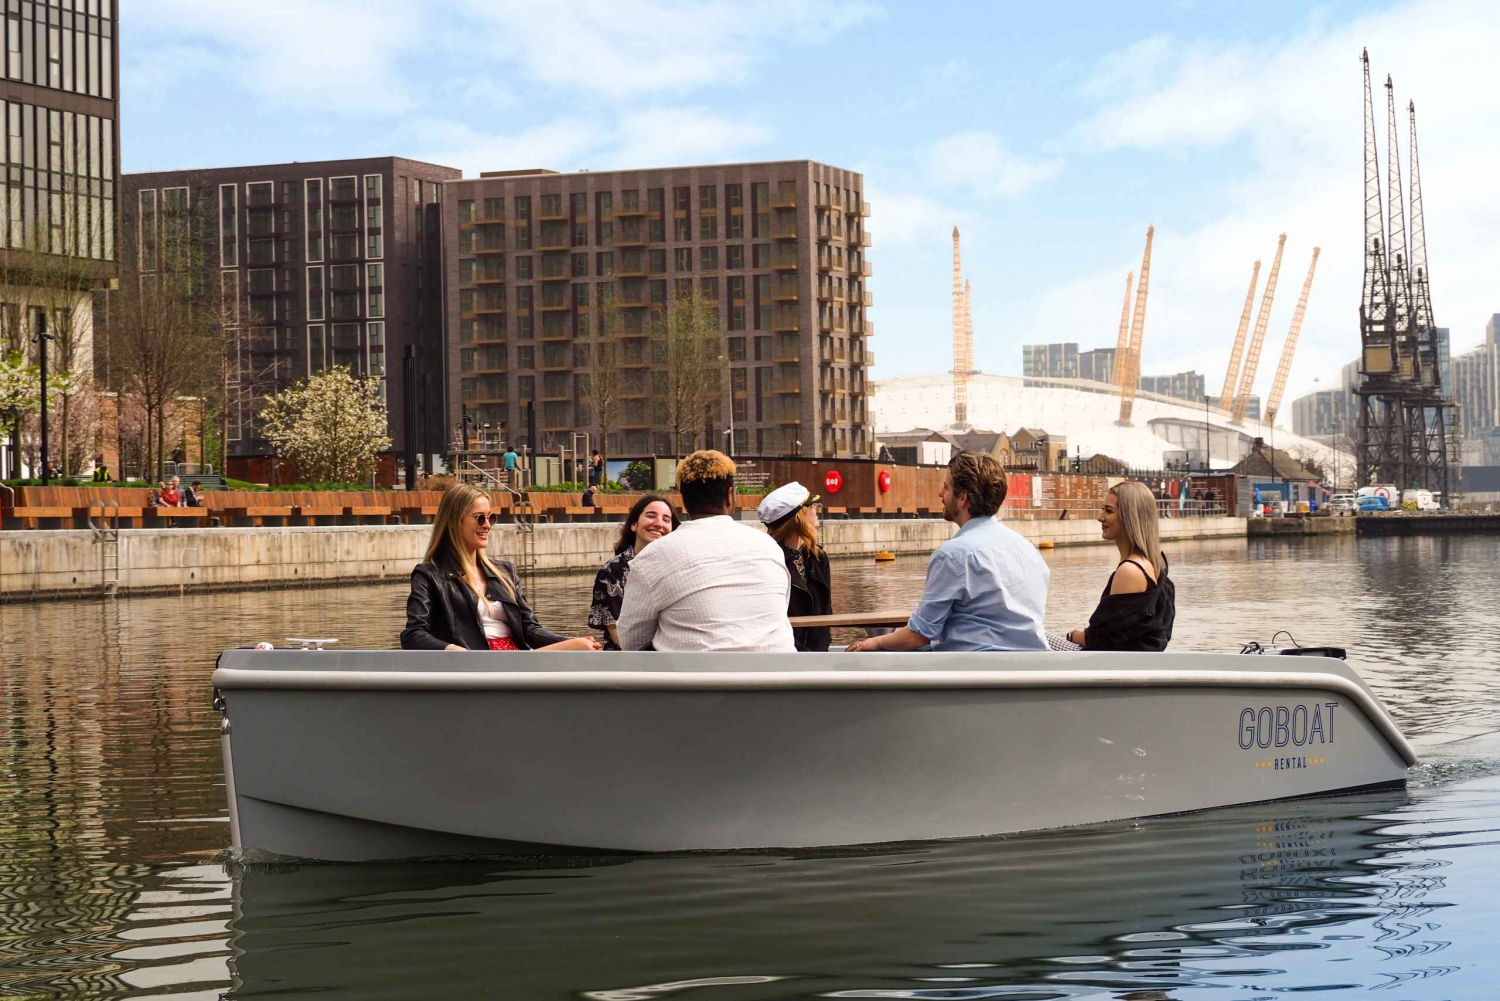 London: GoBoat Rental in Canary Wharf with London Docklands